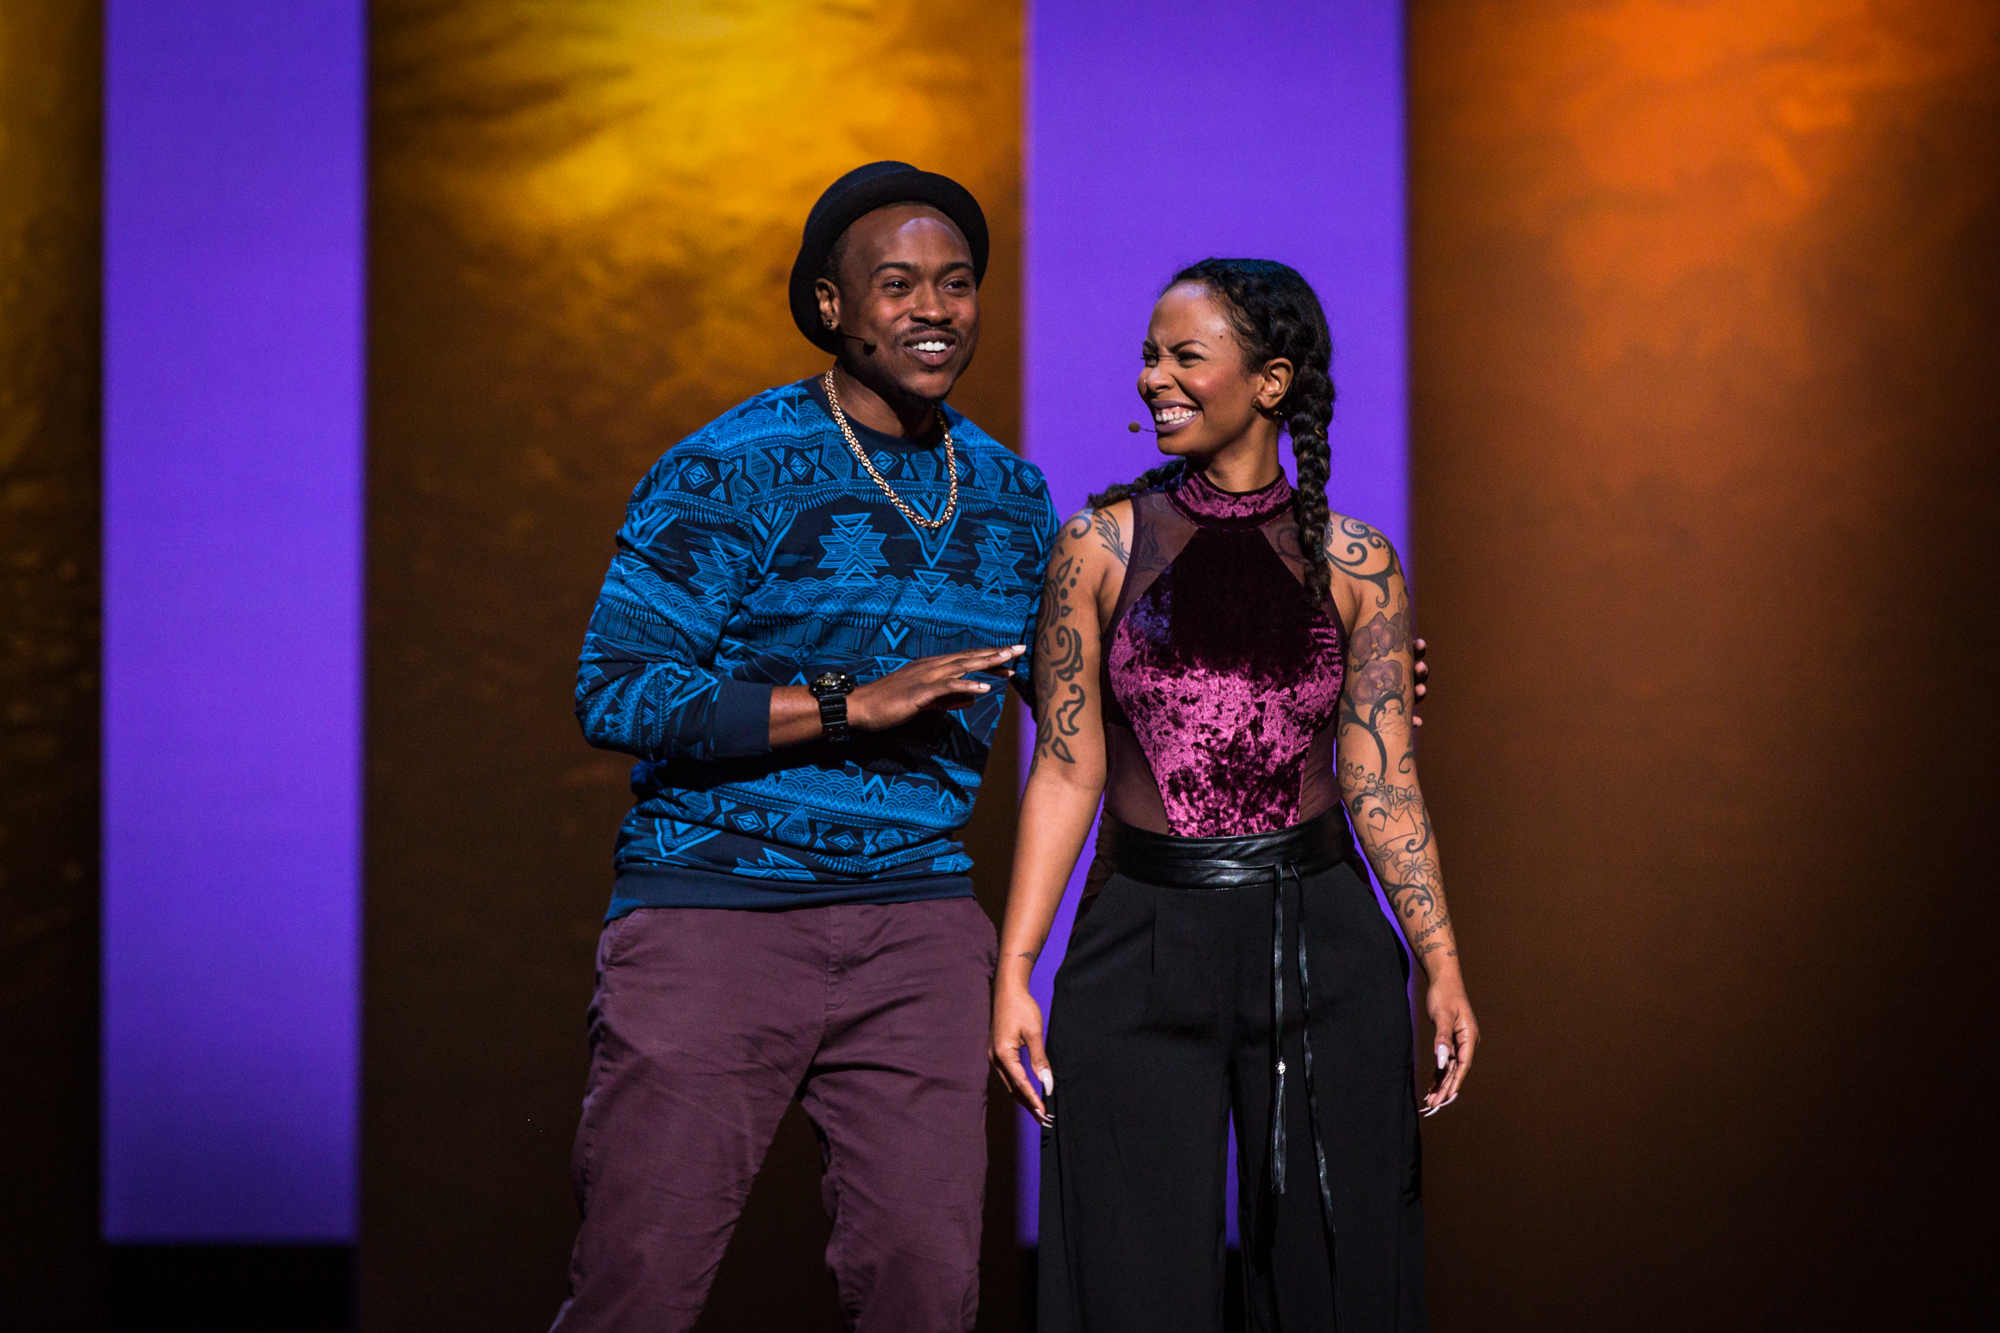 Tiq Milan and Kim Katrin Milan at TEDWomen 2016: It's About Time, October 26-28, 2016, Yerba Buena Centre for the Arts, San Francisco, California. Photo: Marla Aufmuth / TED